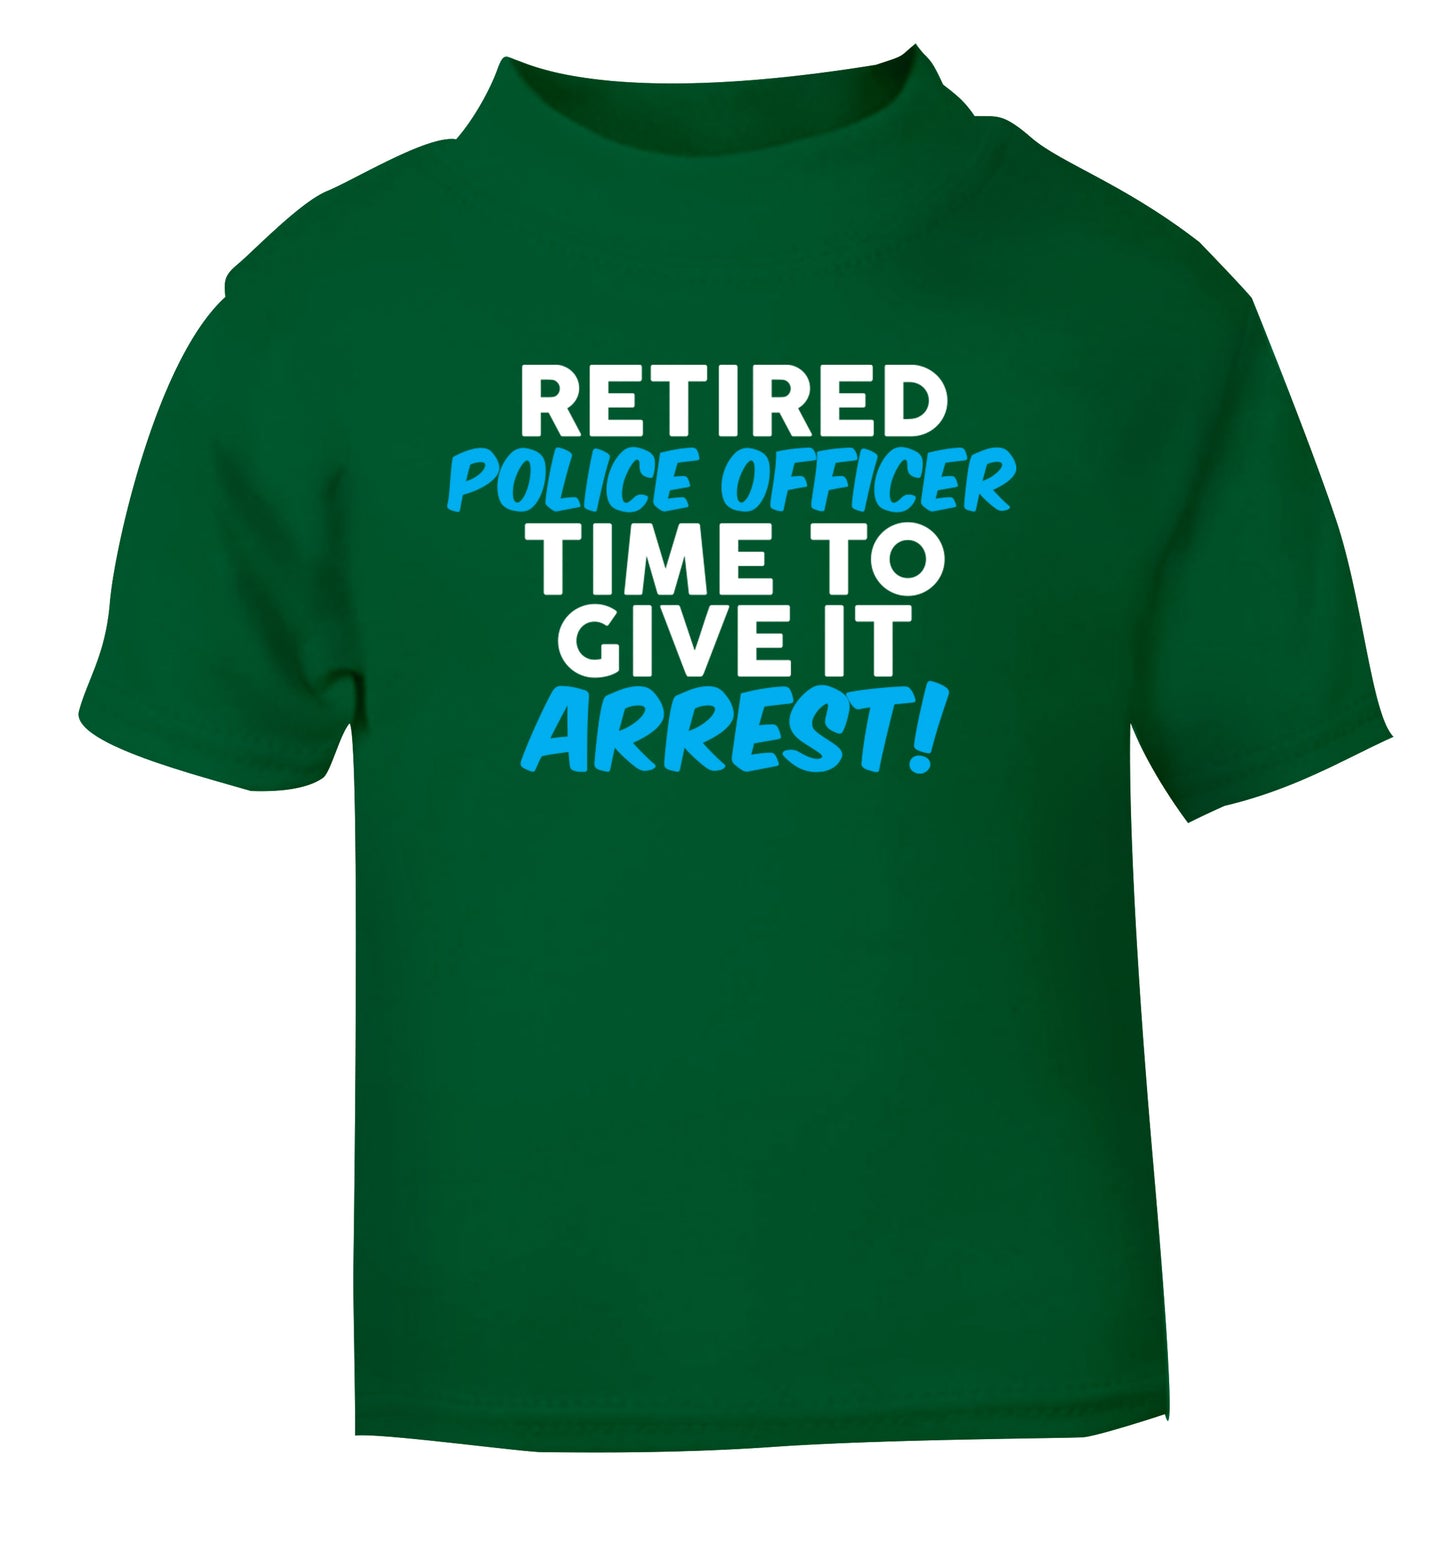 Retired police officer time to give it arrest green Baby Toddler Tshirt 2 Years